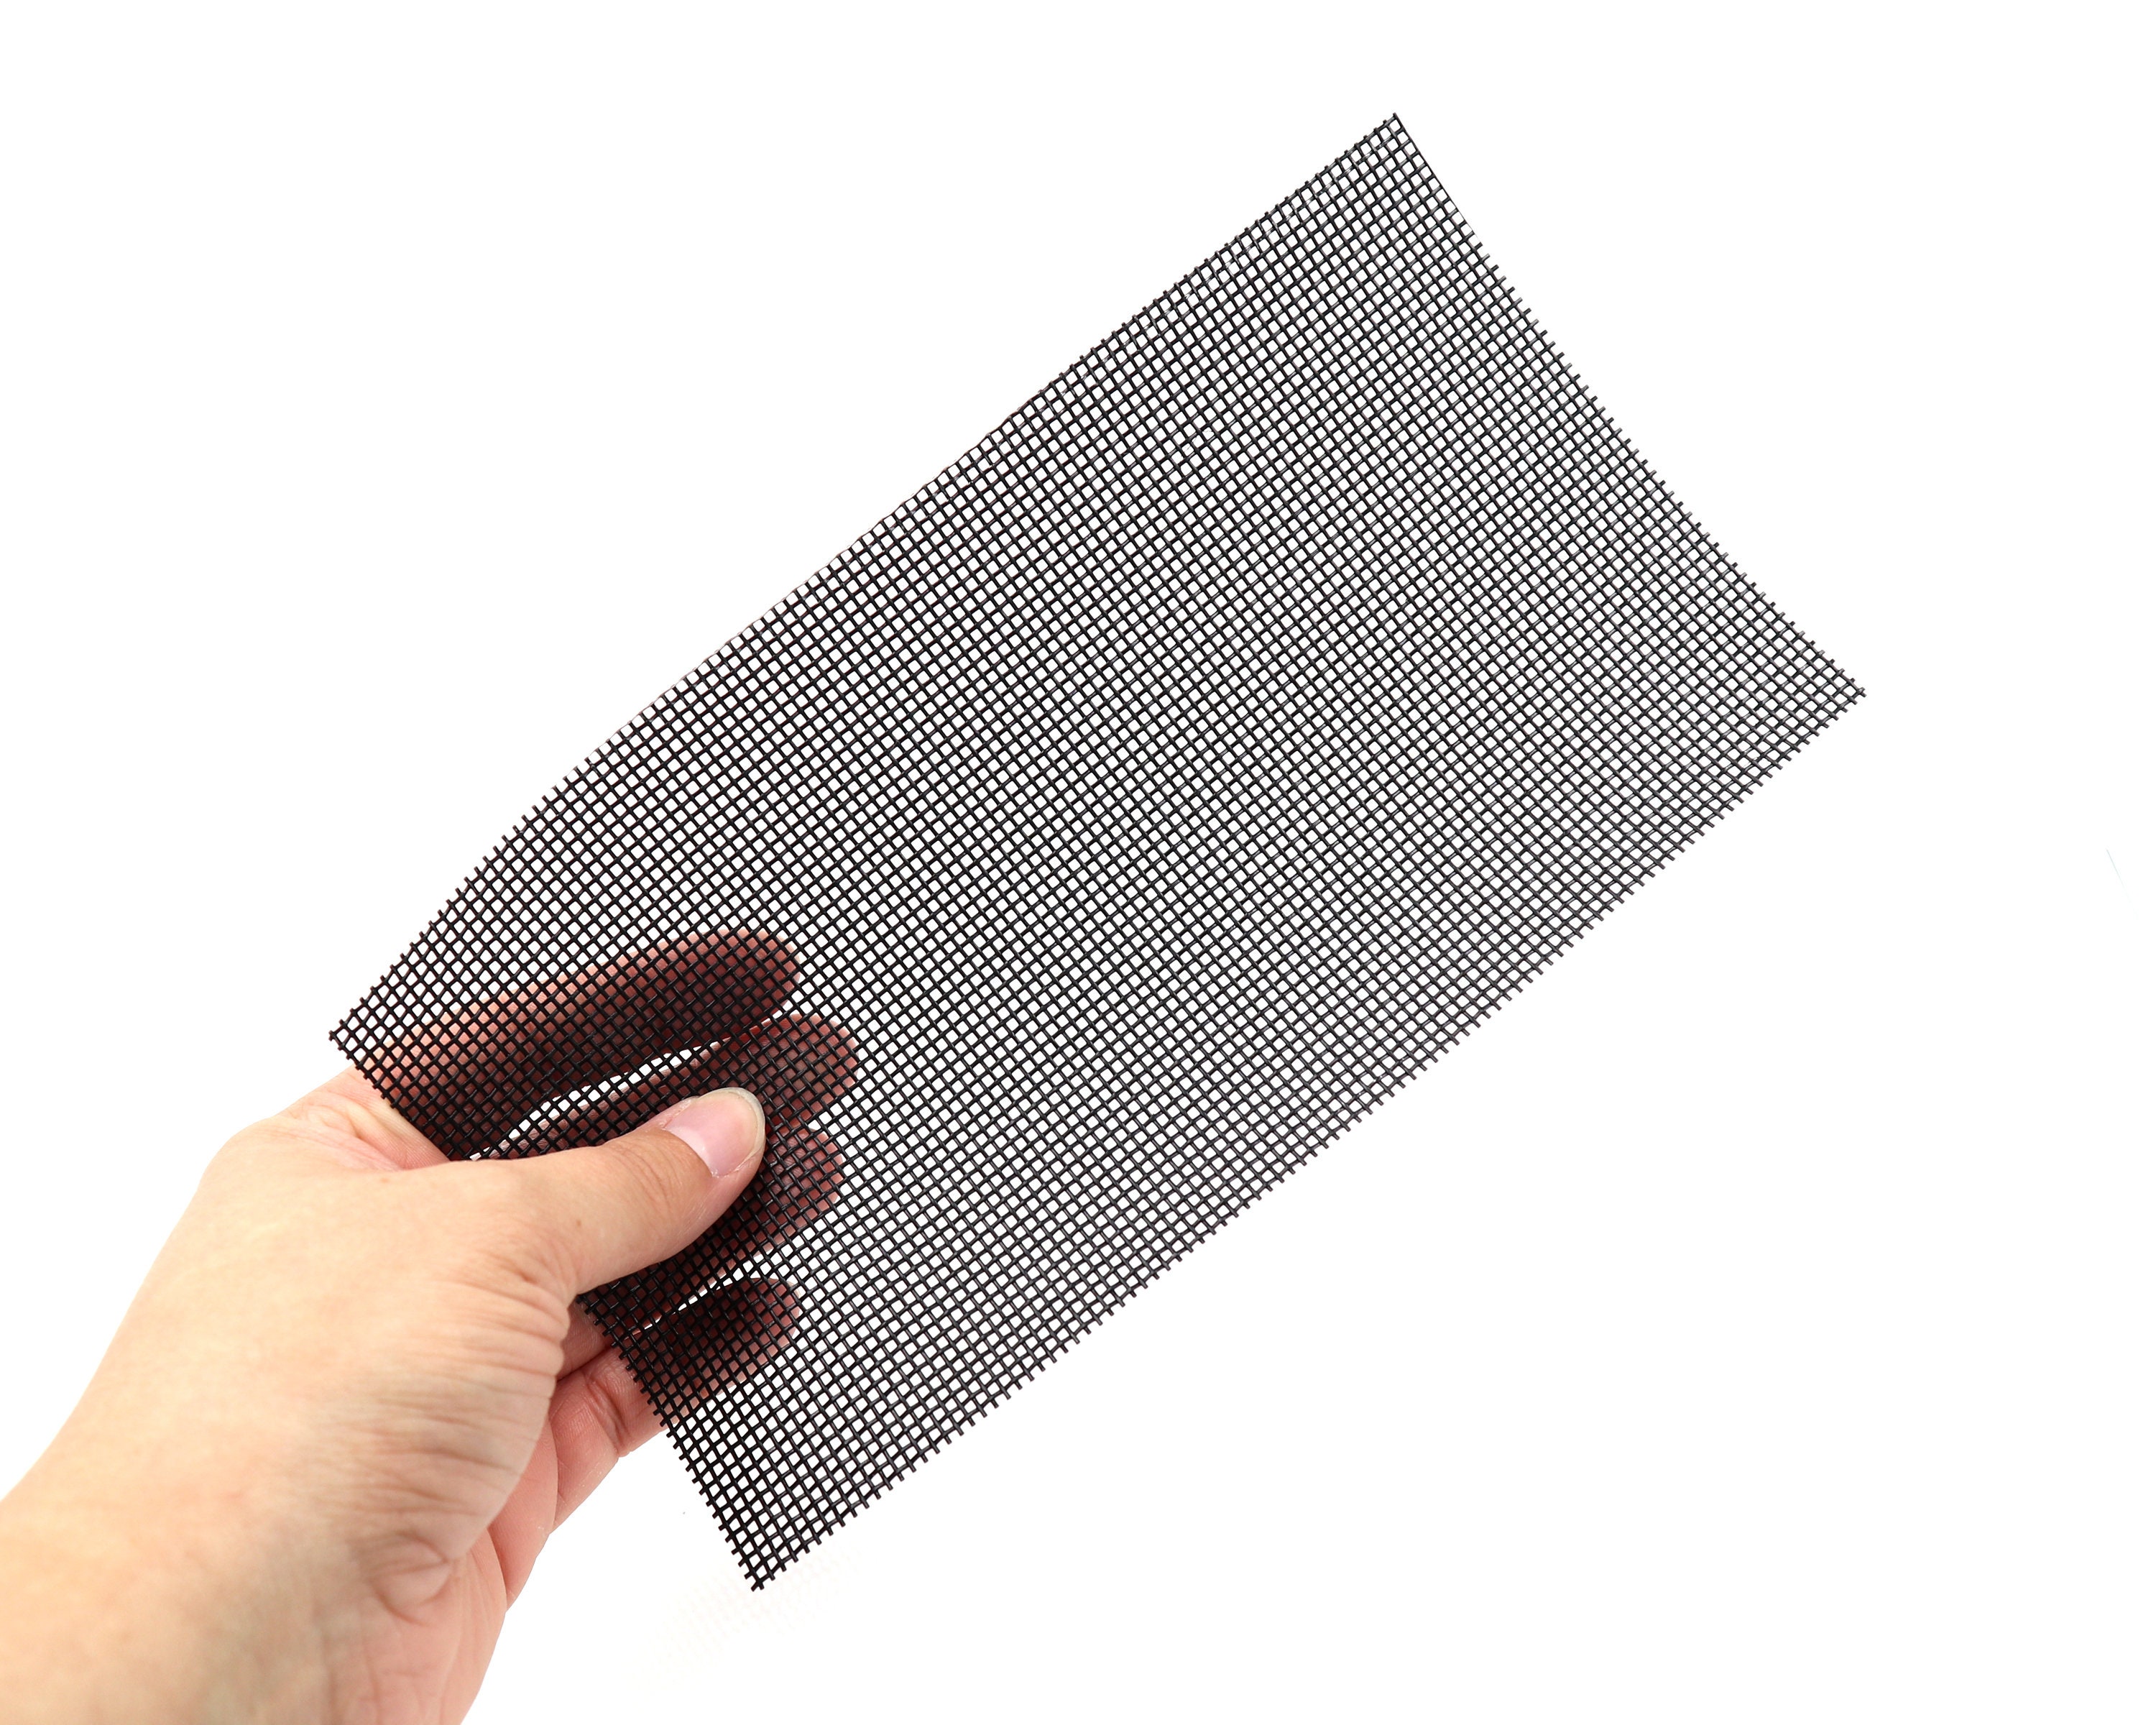 DISCONTINUED High Vision Buckram Mesh Fabric for Making See Through Eyes or  Hidden Eye Duct Holes and Vents in Masks and Fursuit Heads 